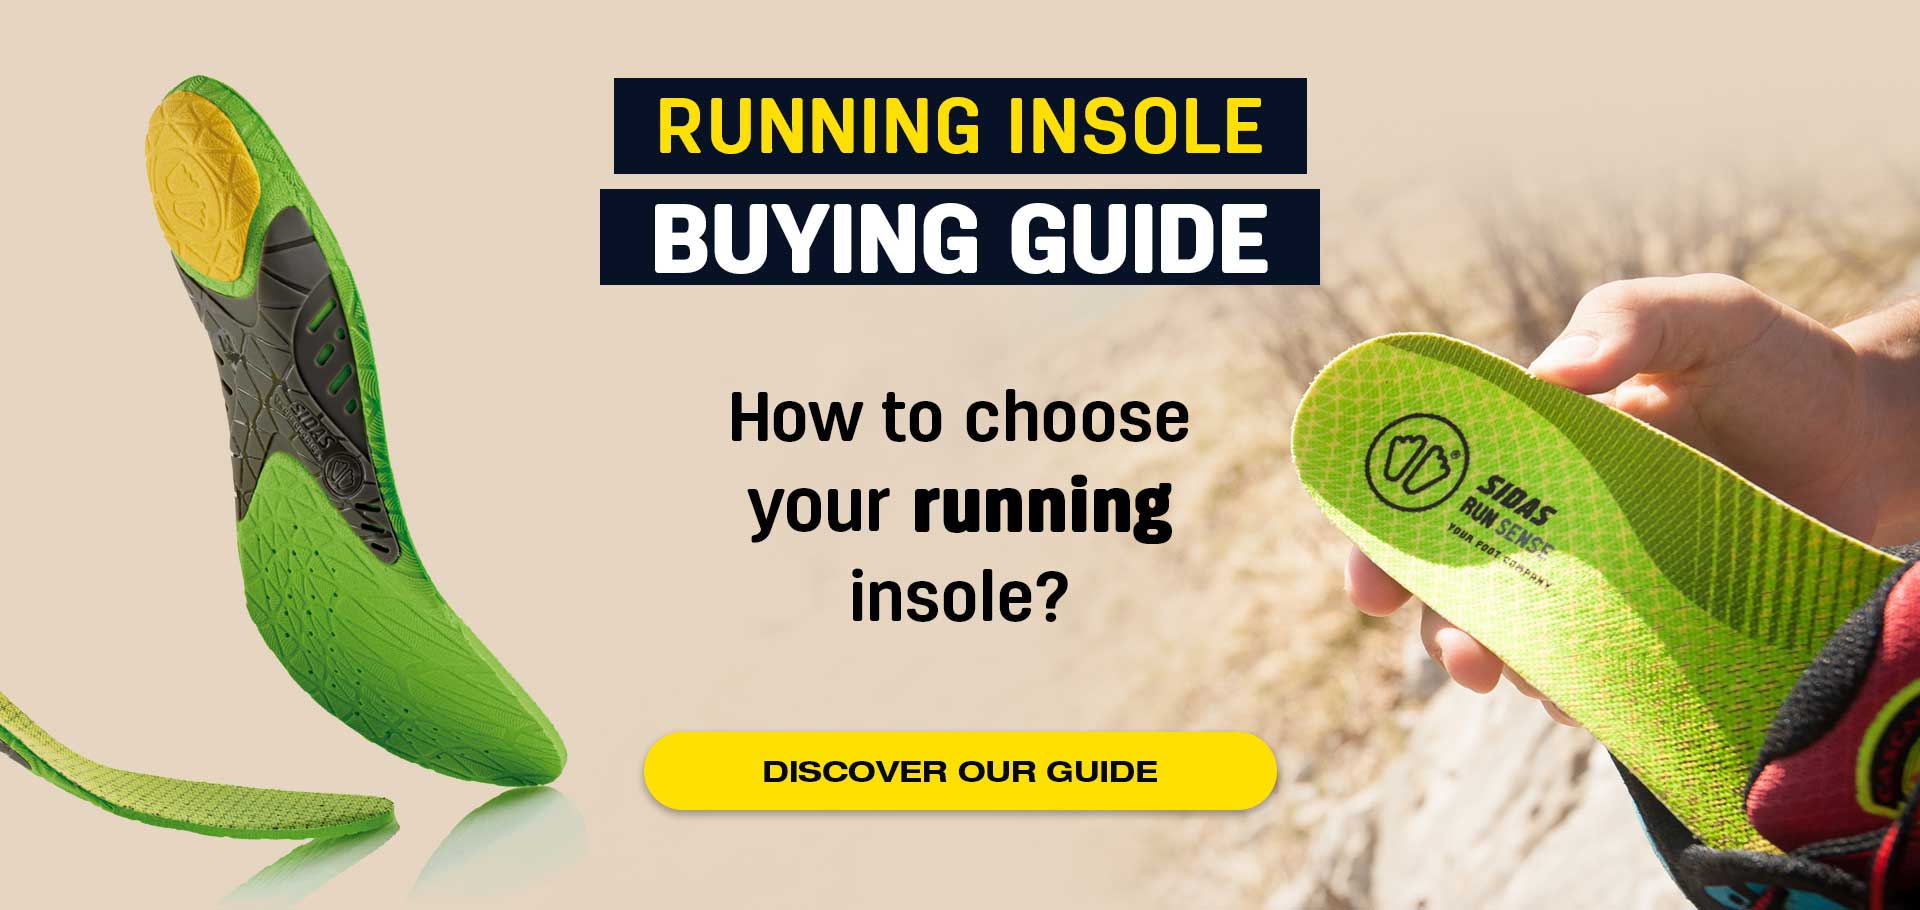 Running insole buying guide : how to choose your Sidas running insole?